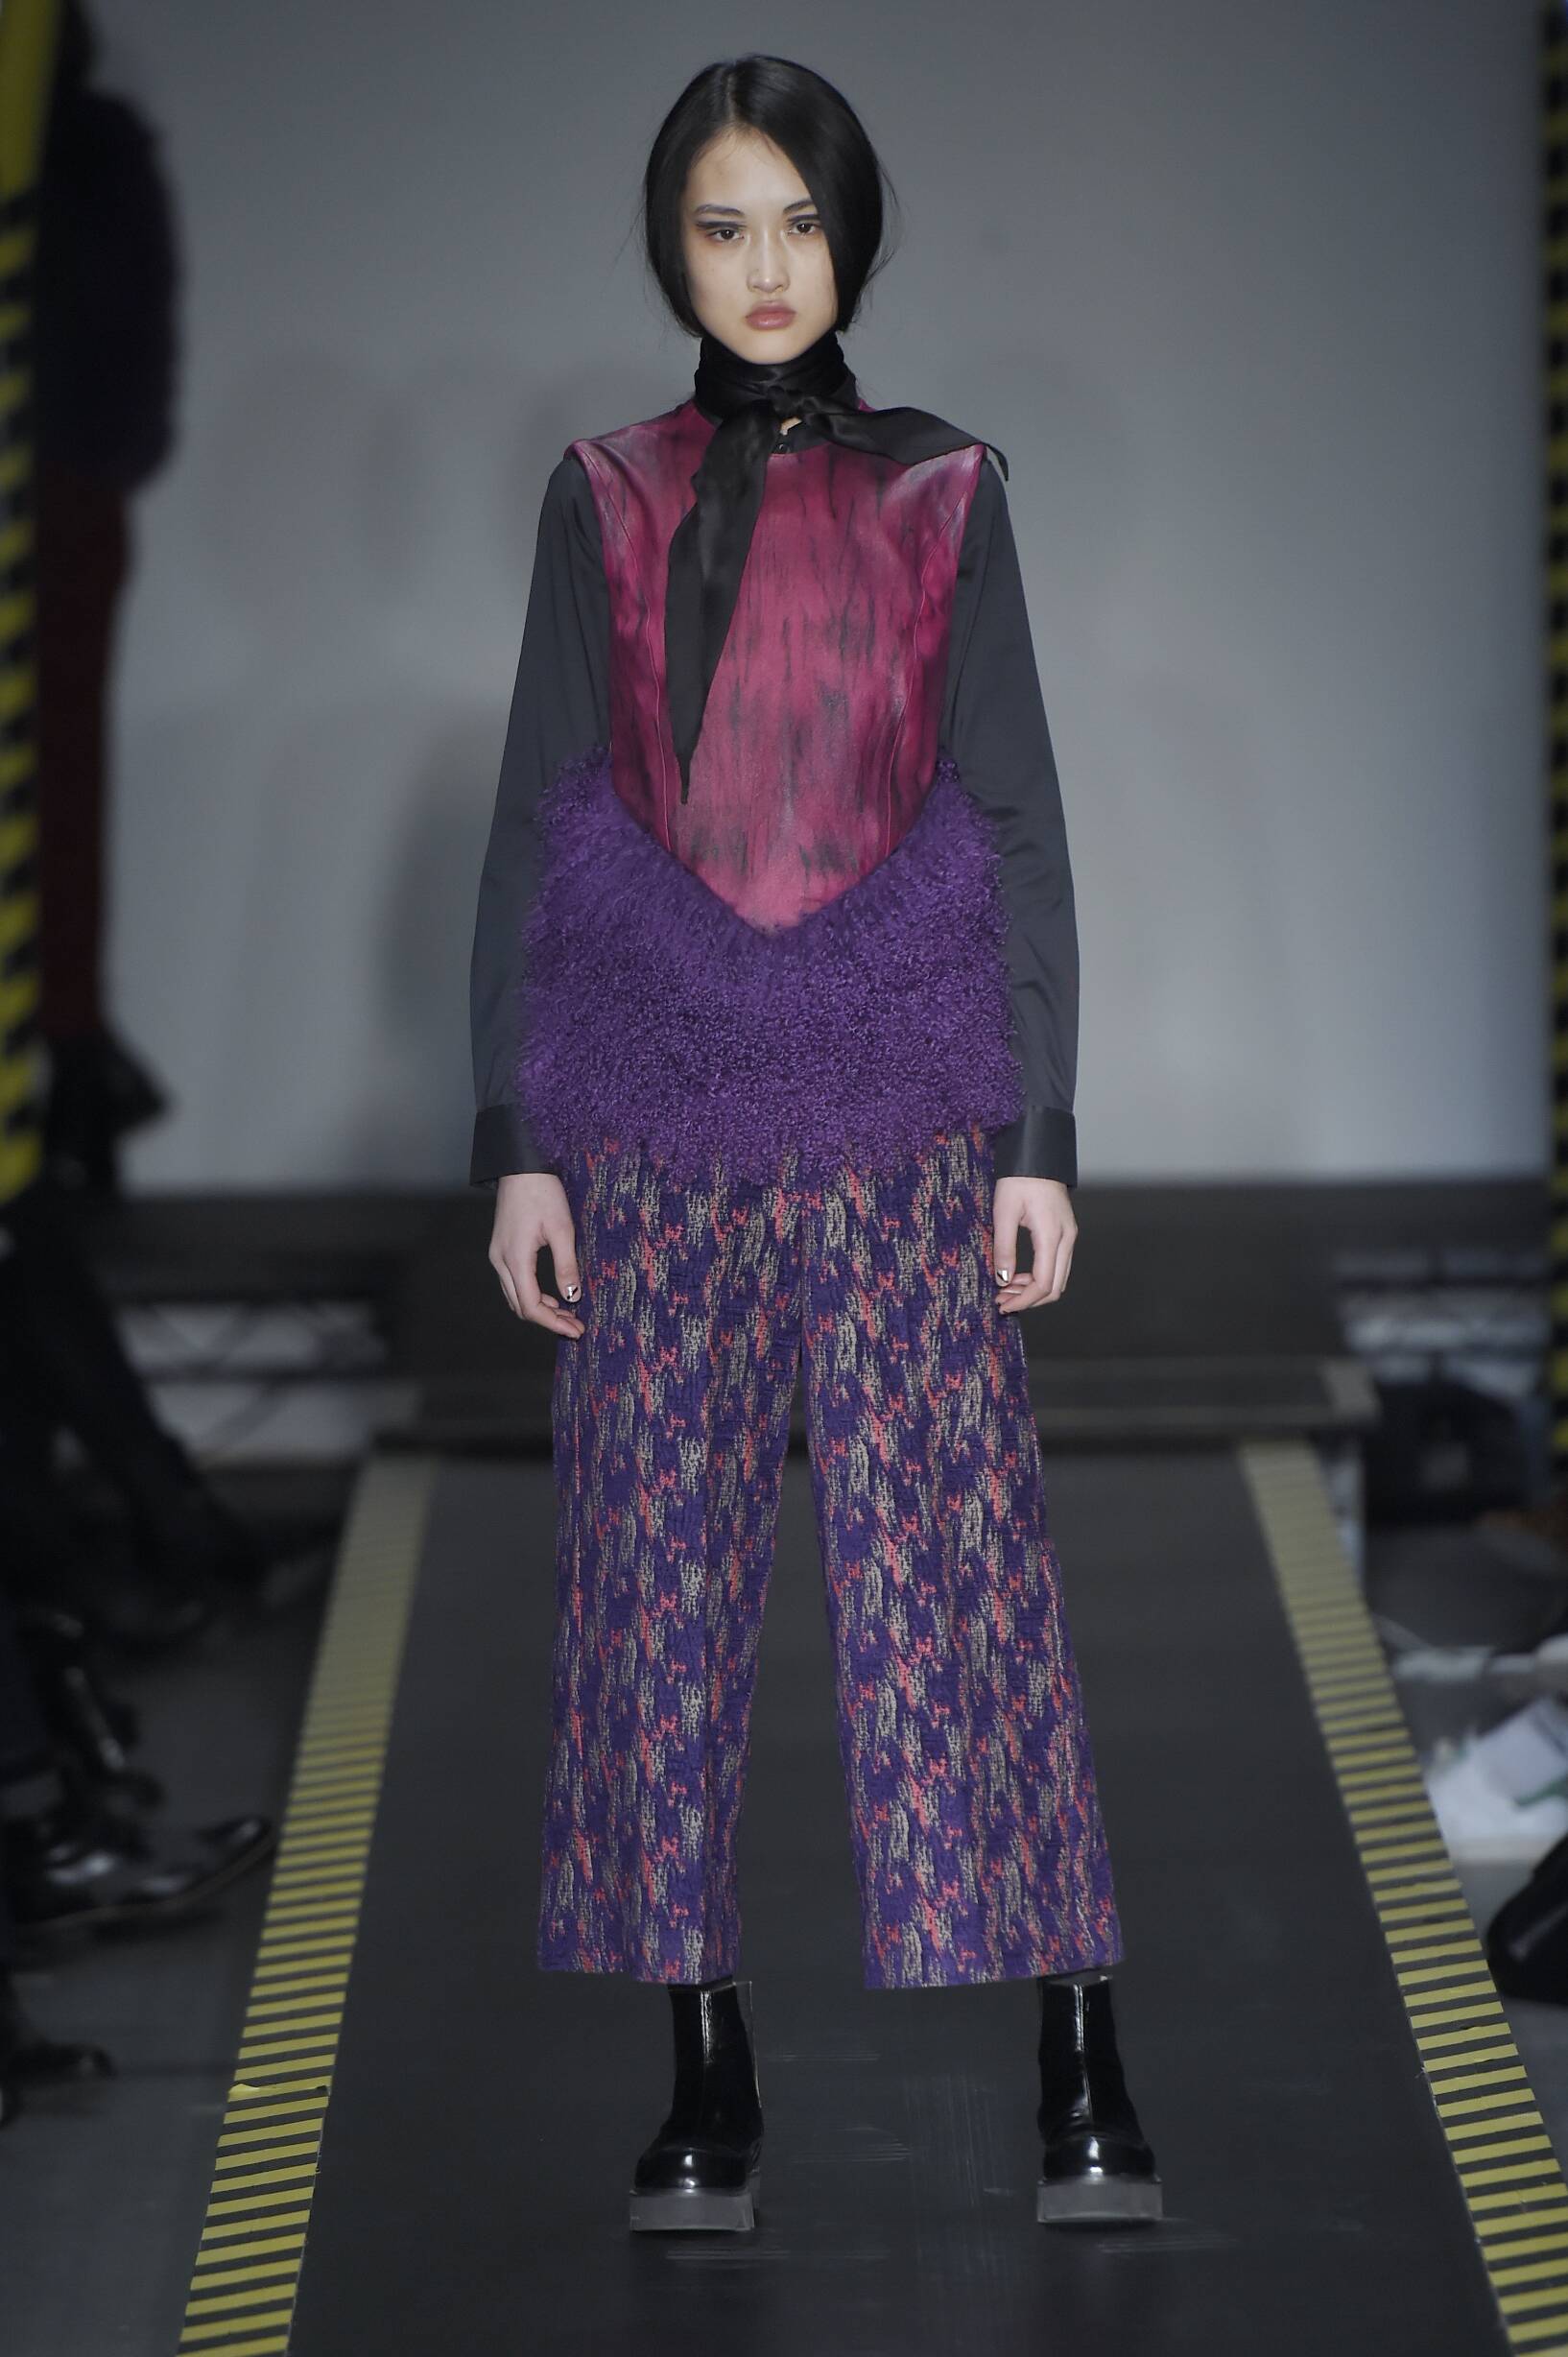 Catwalk House of Holland Womenswear Collection Winter 2015